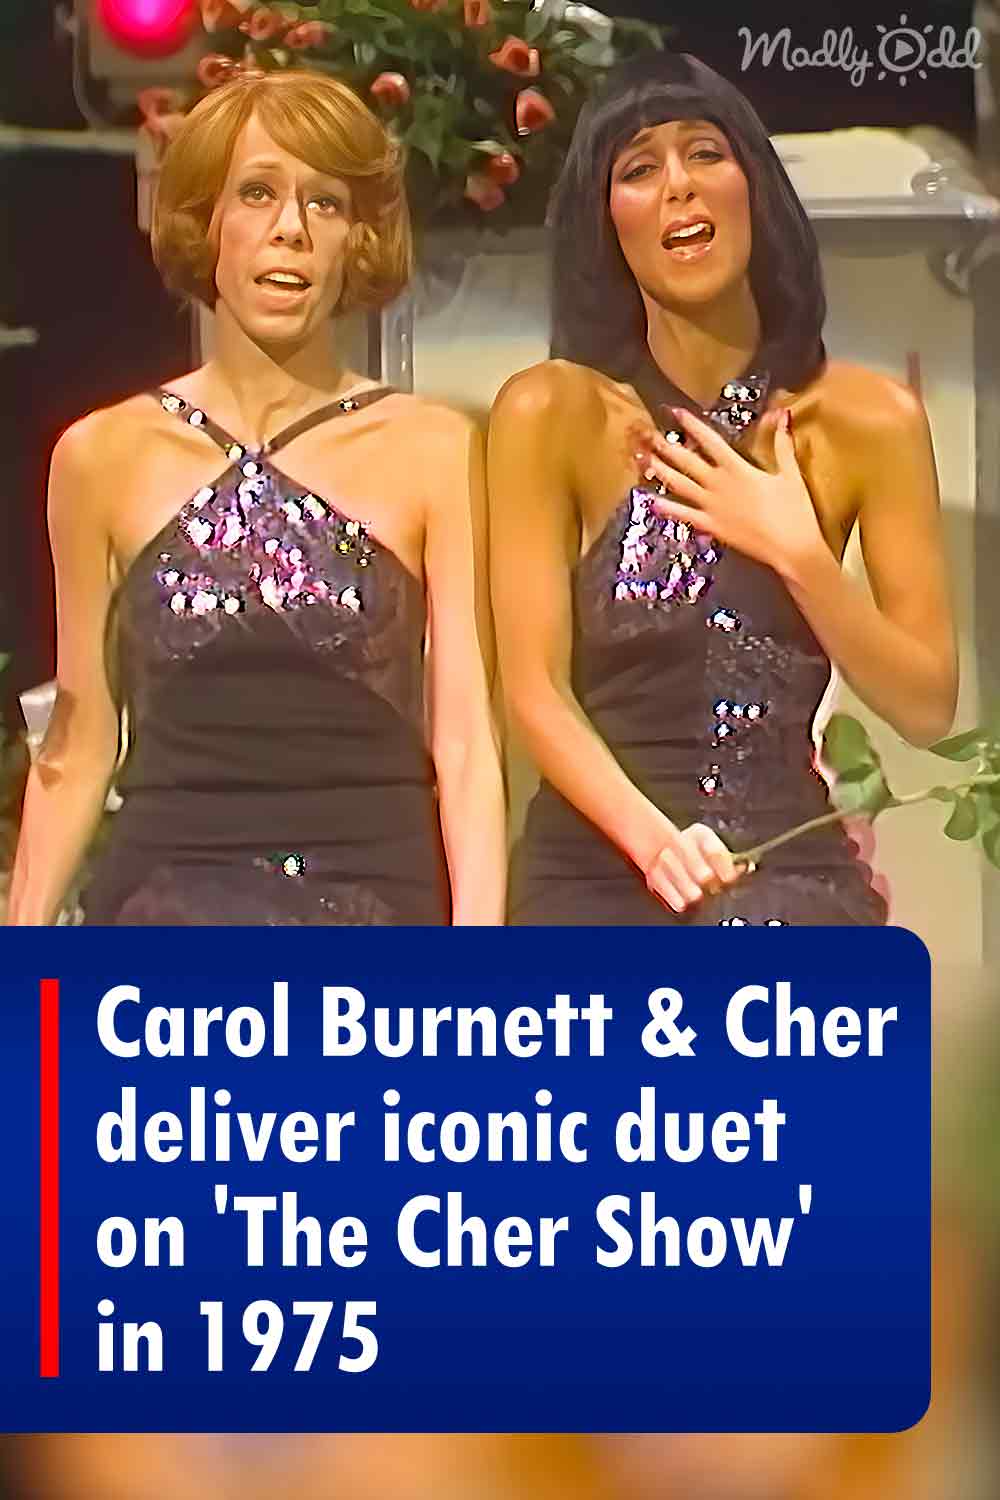 Carol Burnett & Cher deliver iconic duet on \'The Cher Show\' in 1975